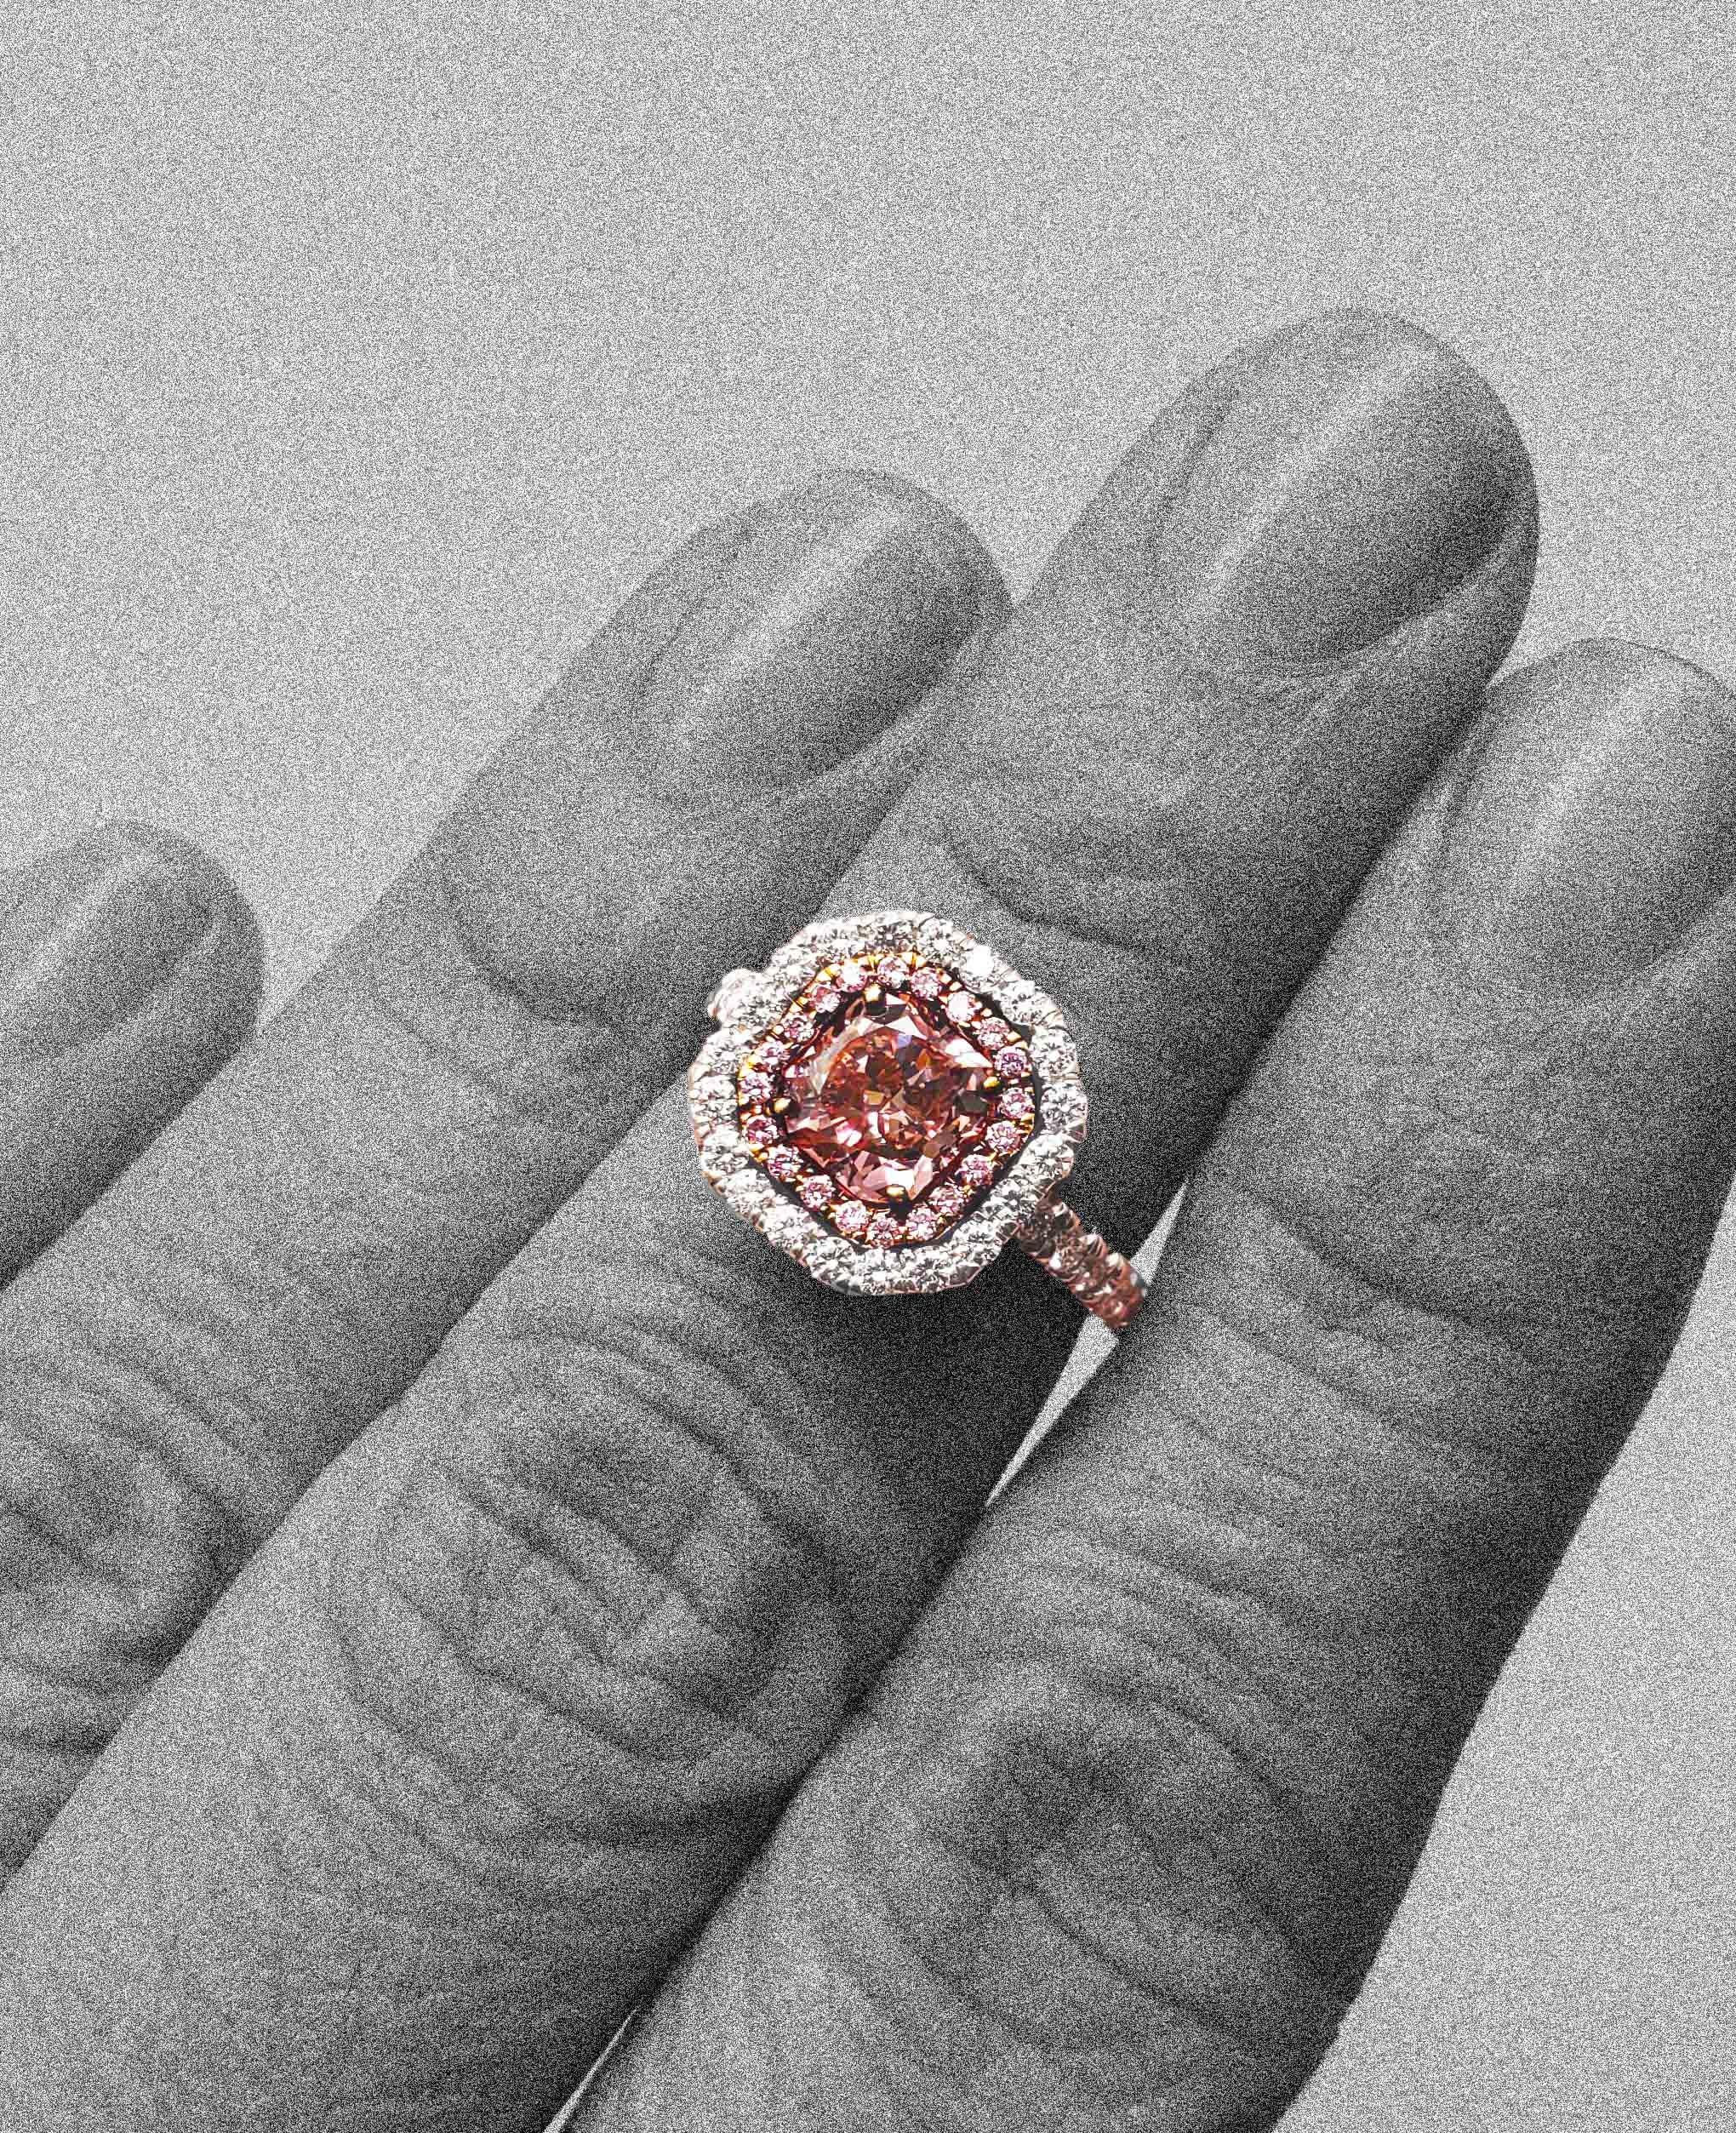 Scarselli One Carat Fancy Deep Pink Diamond in Platinum In New Condition For Sale In New York, NY